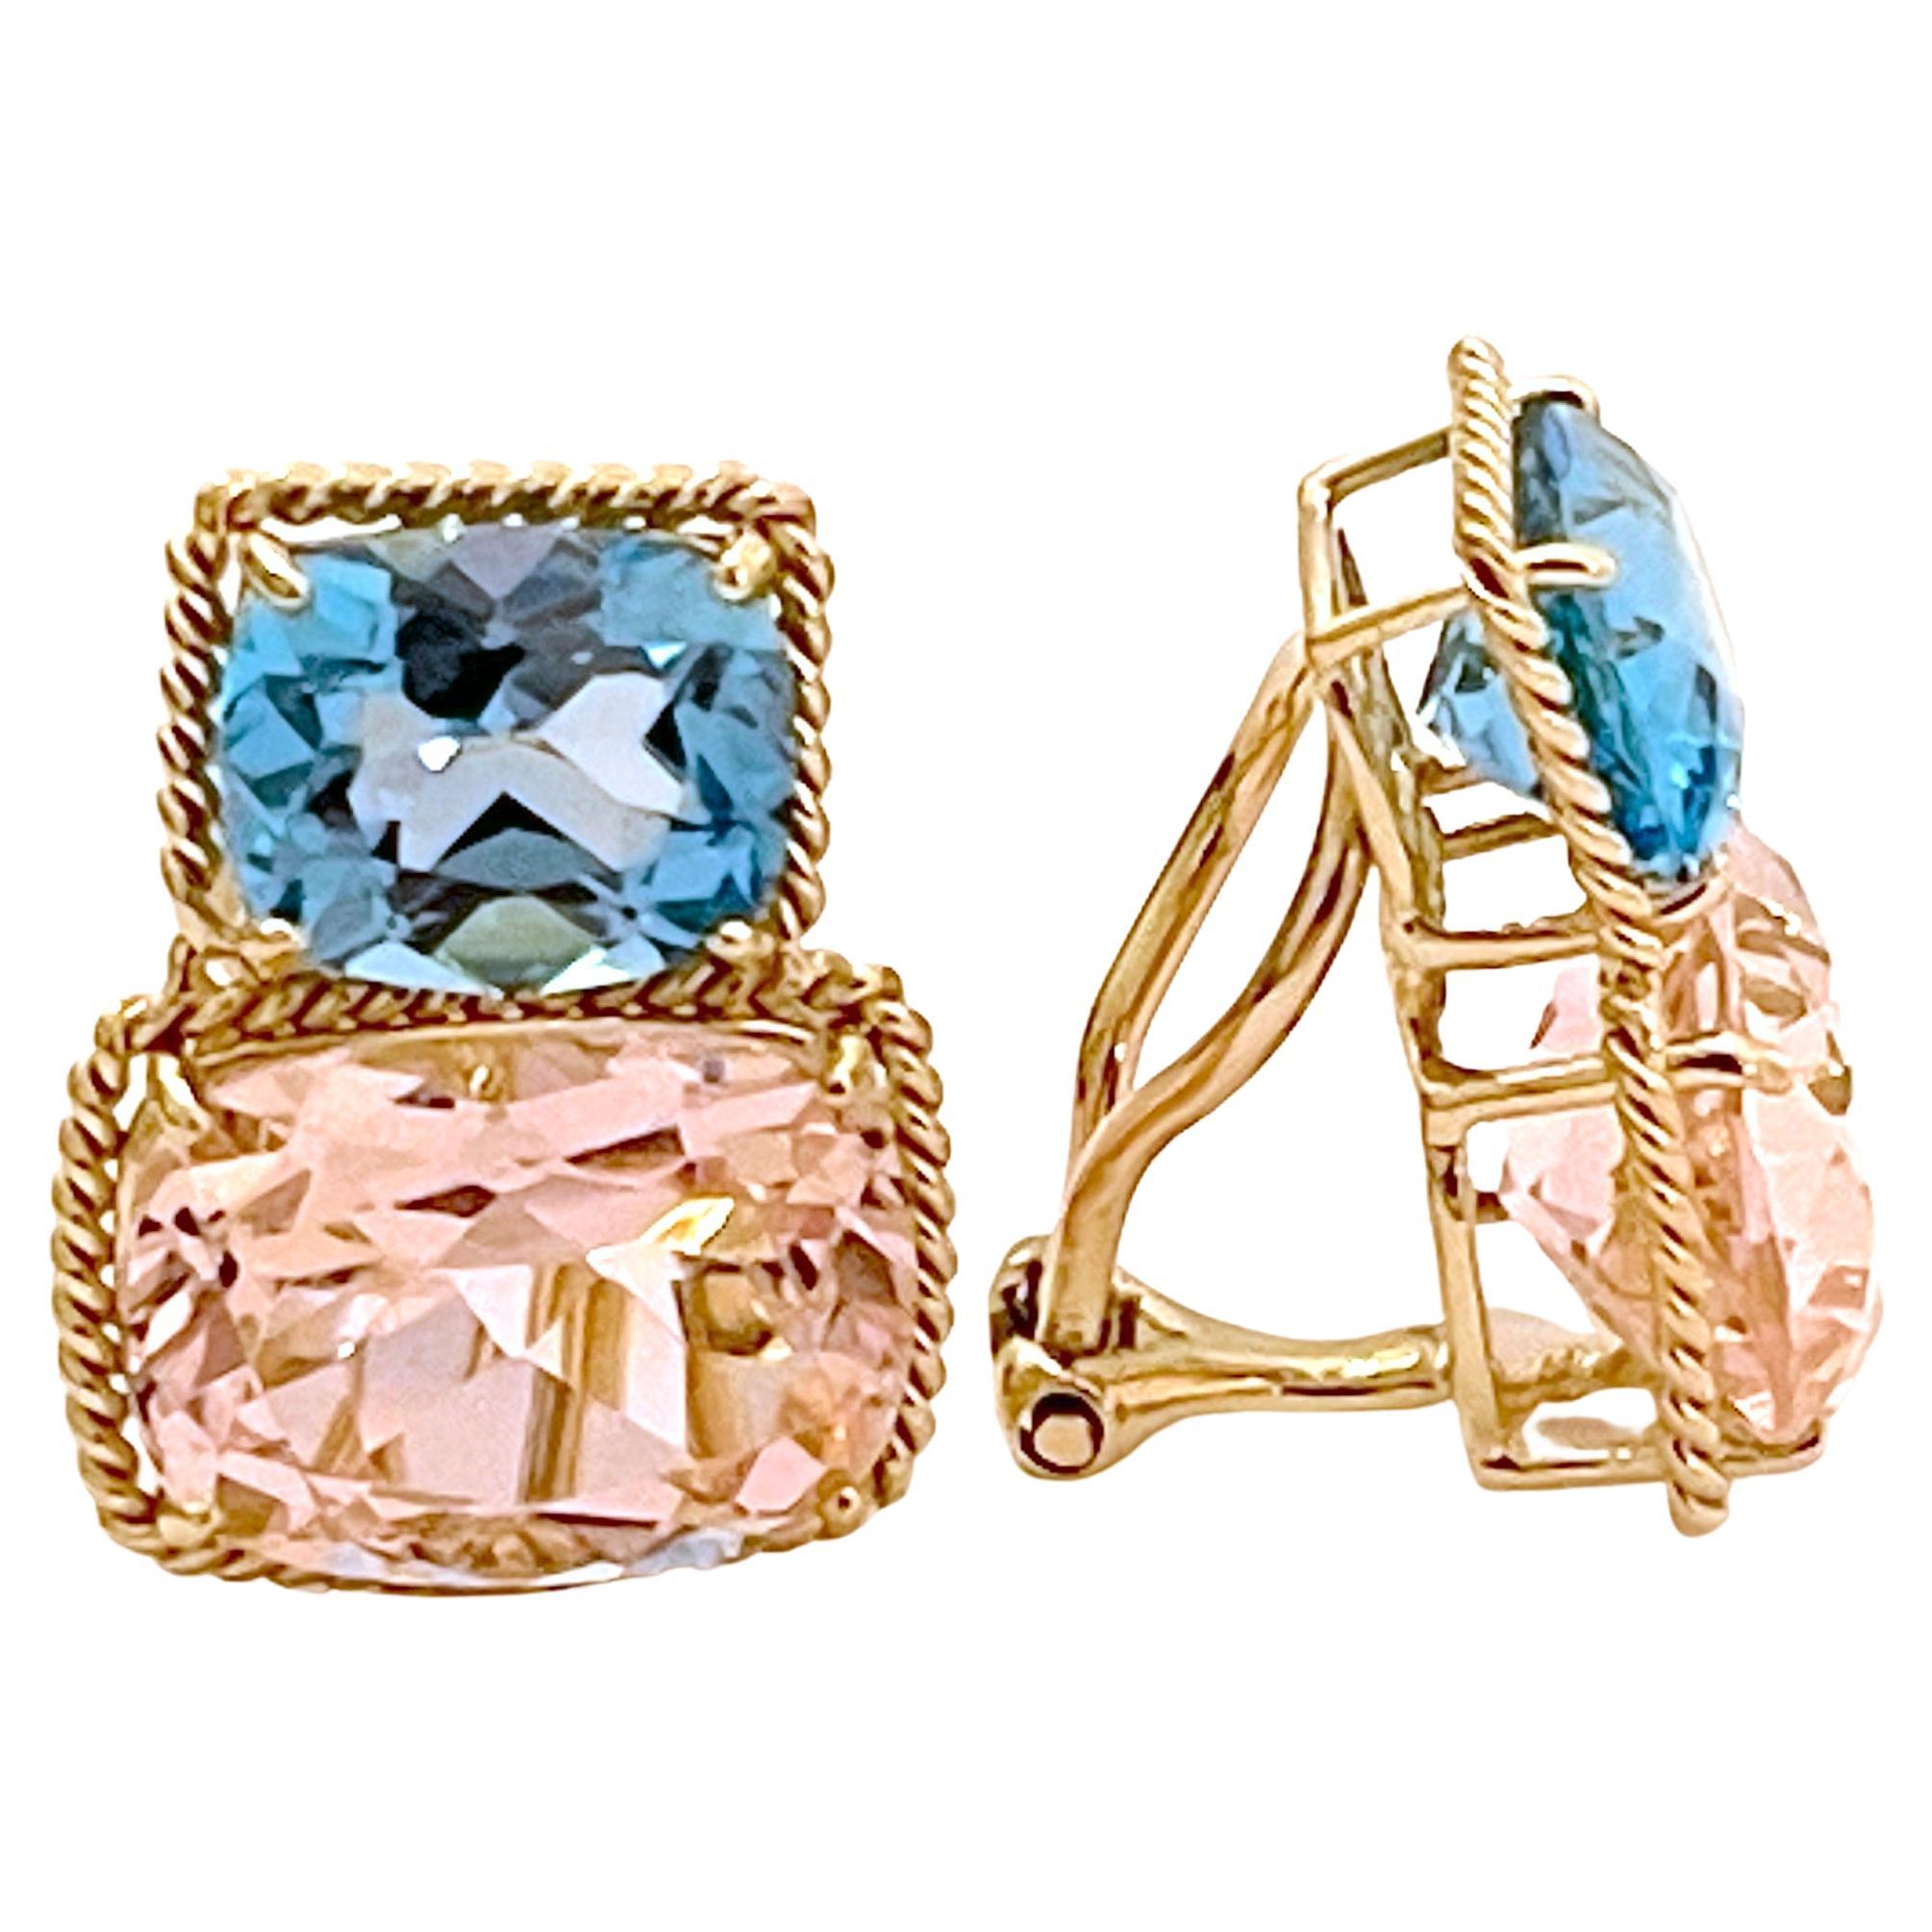 Elegant 18kt Yellow Gold Rope Twist Border two stone Earring with Faceted Iolite and Blue Topaz.  This is a classic day to evening earring that can be made clip or pierced.

The meaning measures 3/4' tall and 1/2